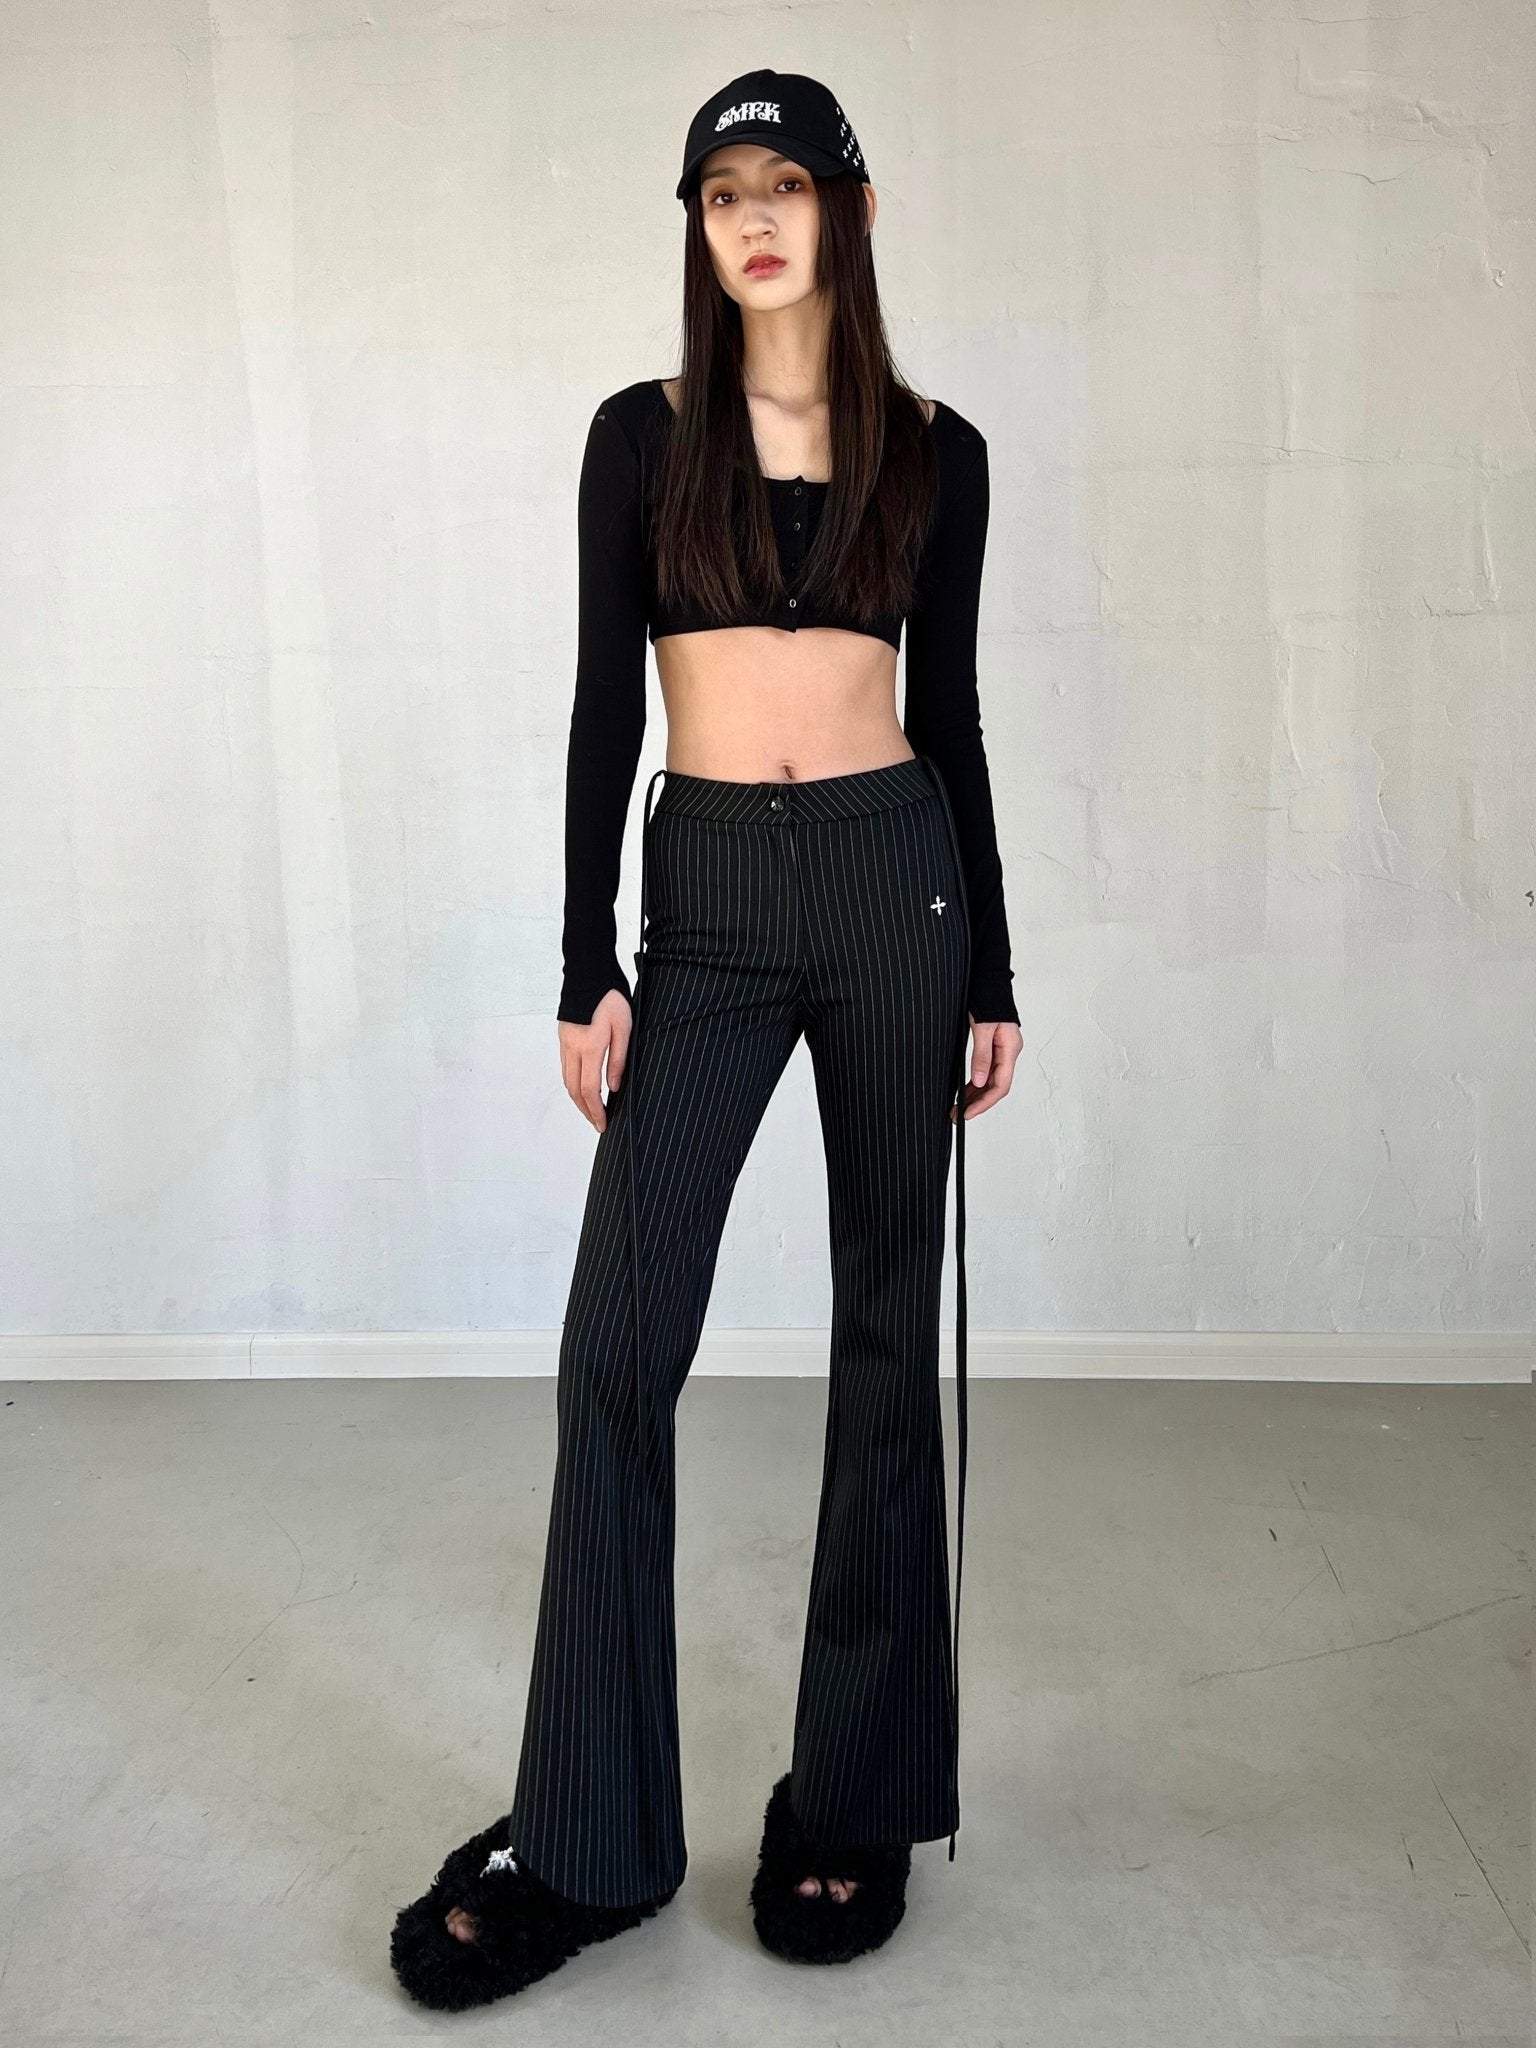 SMFK Striped Mermaid Classic Suit Pants | MADA IN CHINA